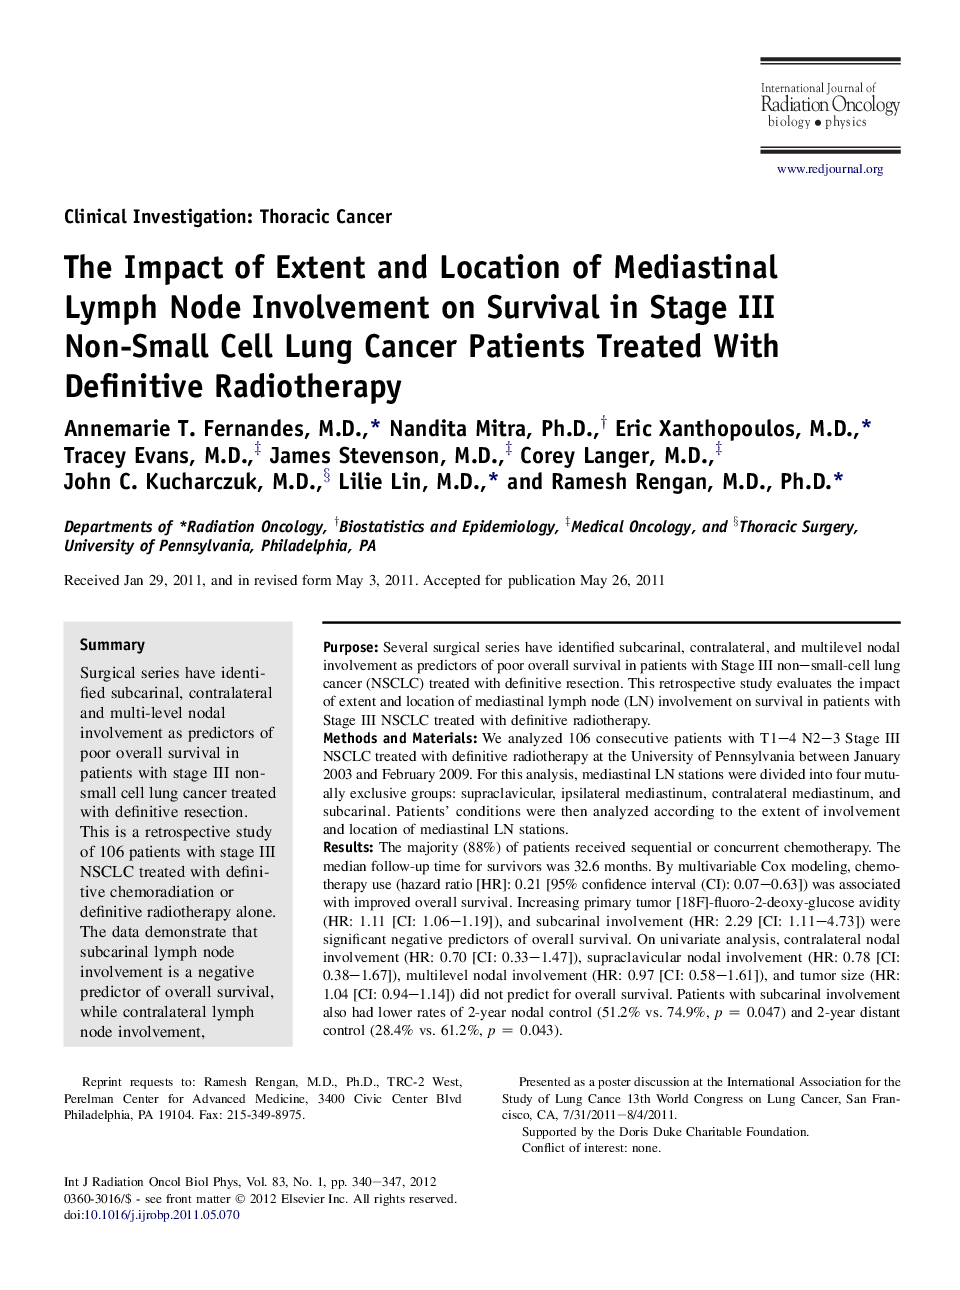 The Impact of Extent and Location of Mediastinal Lymph Node Involvement on Survival in Stage III Non-Small Cell Lung Cancer Patients Treated With Definitive Radiotherapy